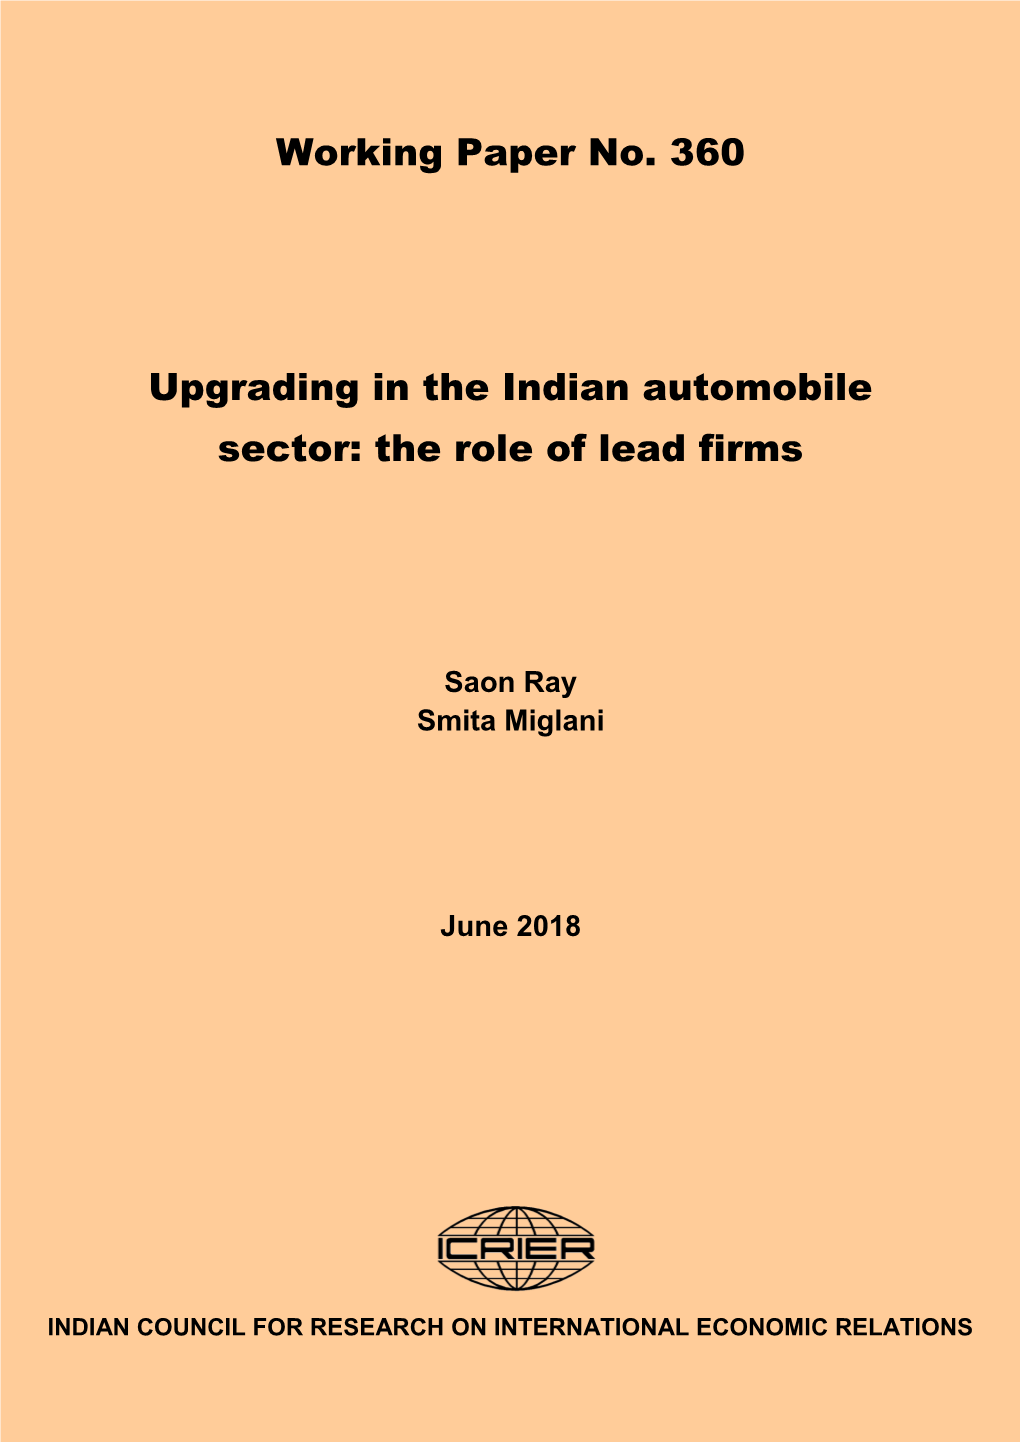 Upgrading in the Indian Automobile Sector: the Role of Lead Firms